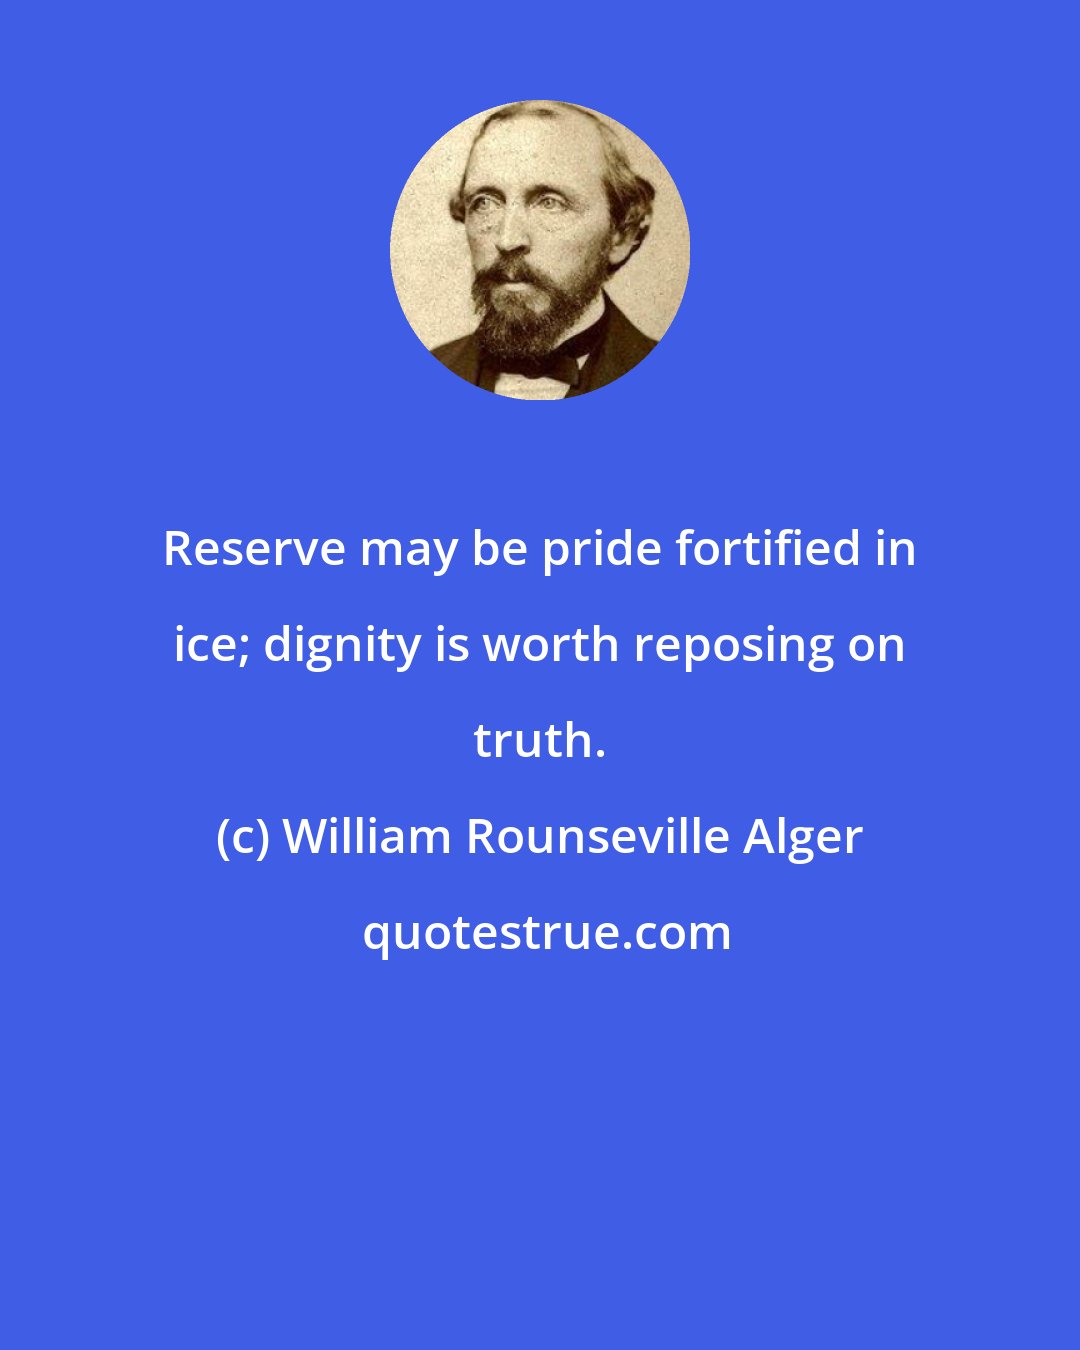 William Rounseville Alger: Reserve may be pride fortified in ice; dignity is worth reposing on truth.